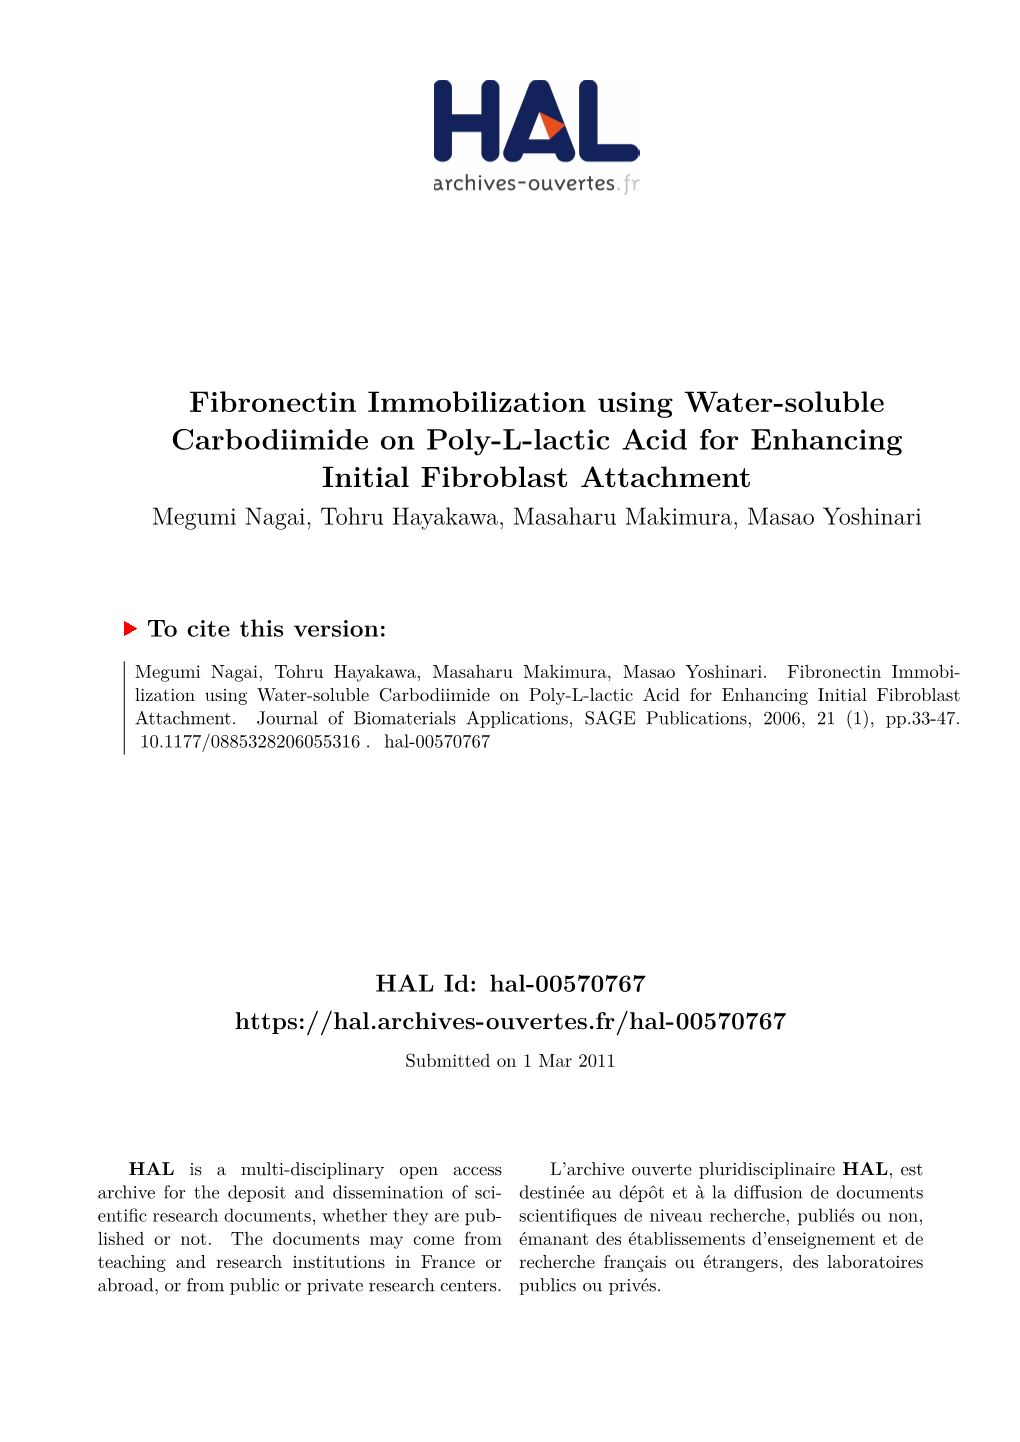 Fibronectin Immobilization Using Water-Soluble Carbodiimide On